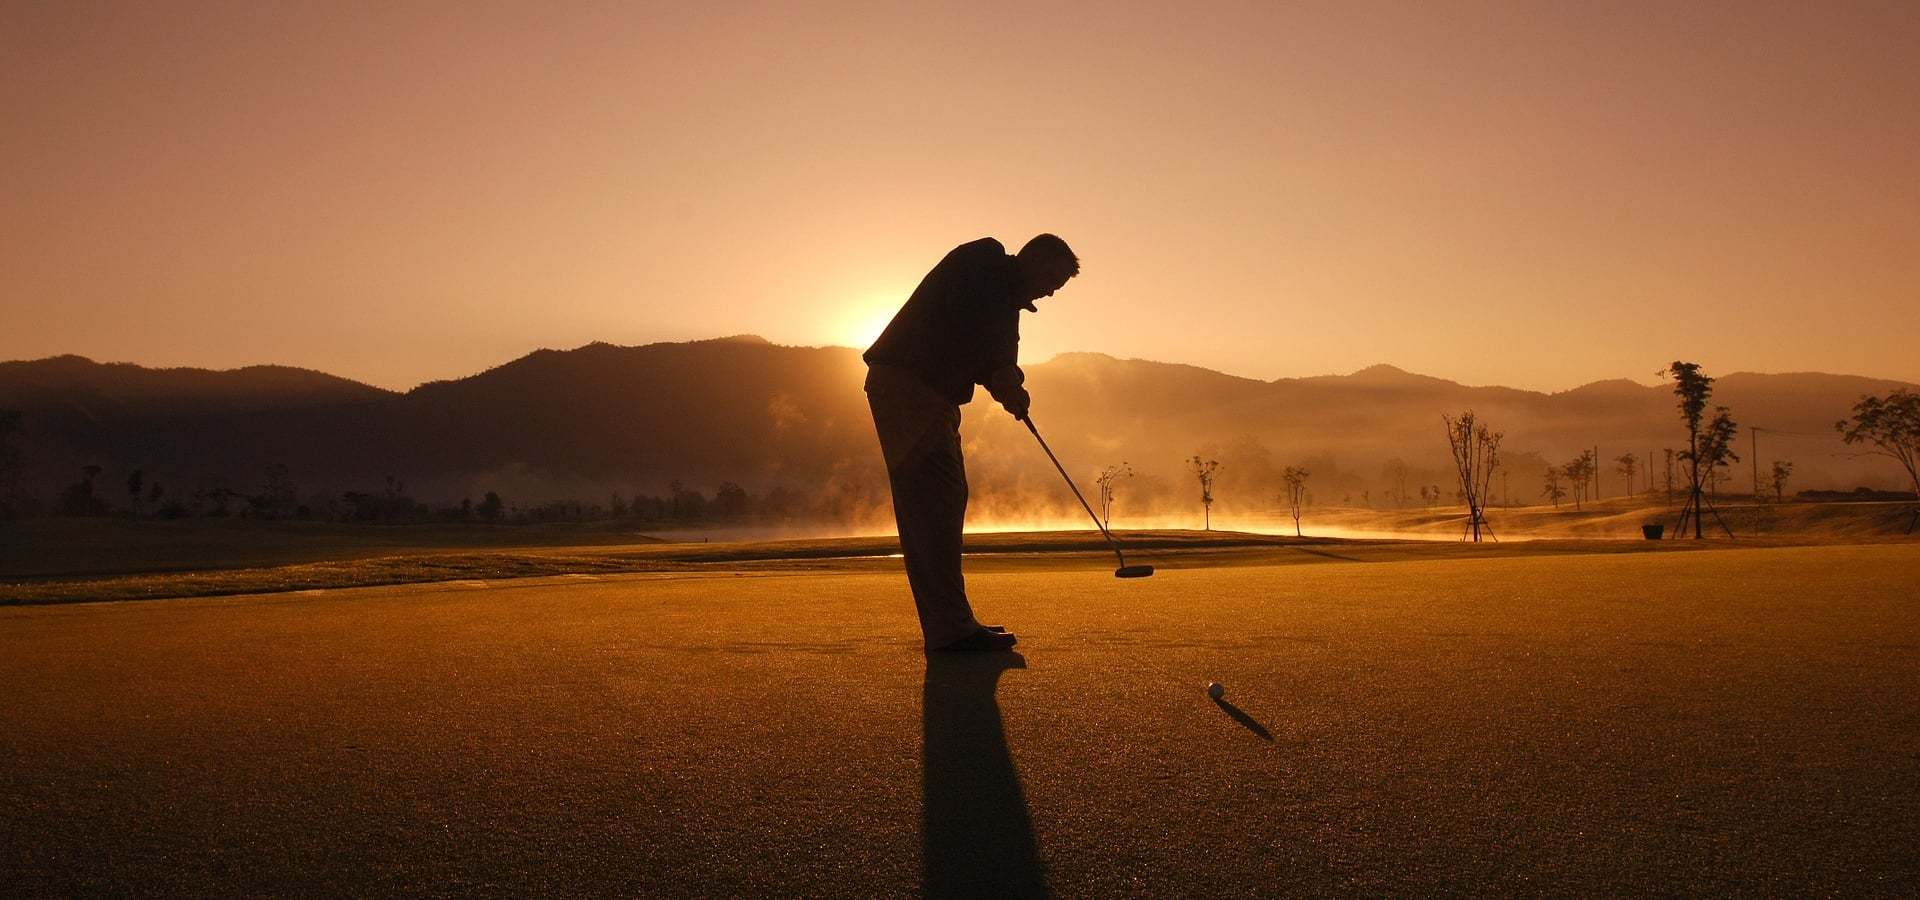 10 Texas Golf Courses Every Golfer Should Try